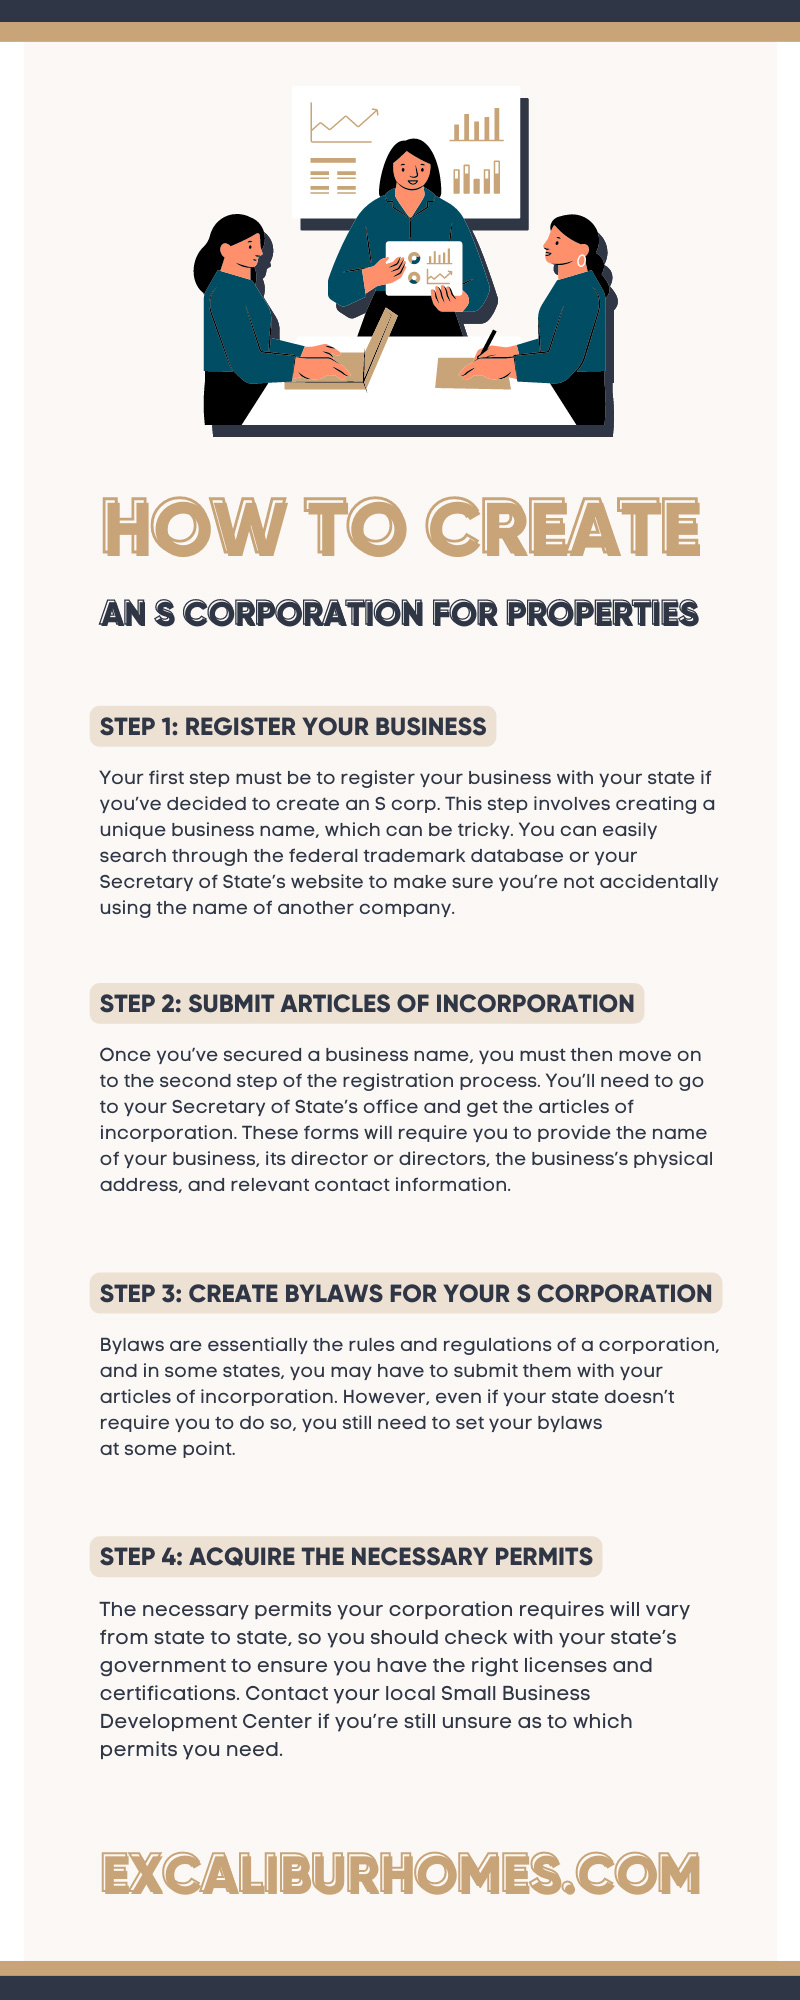 How To Create an S Corporation for Properties